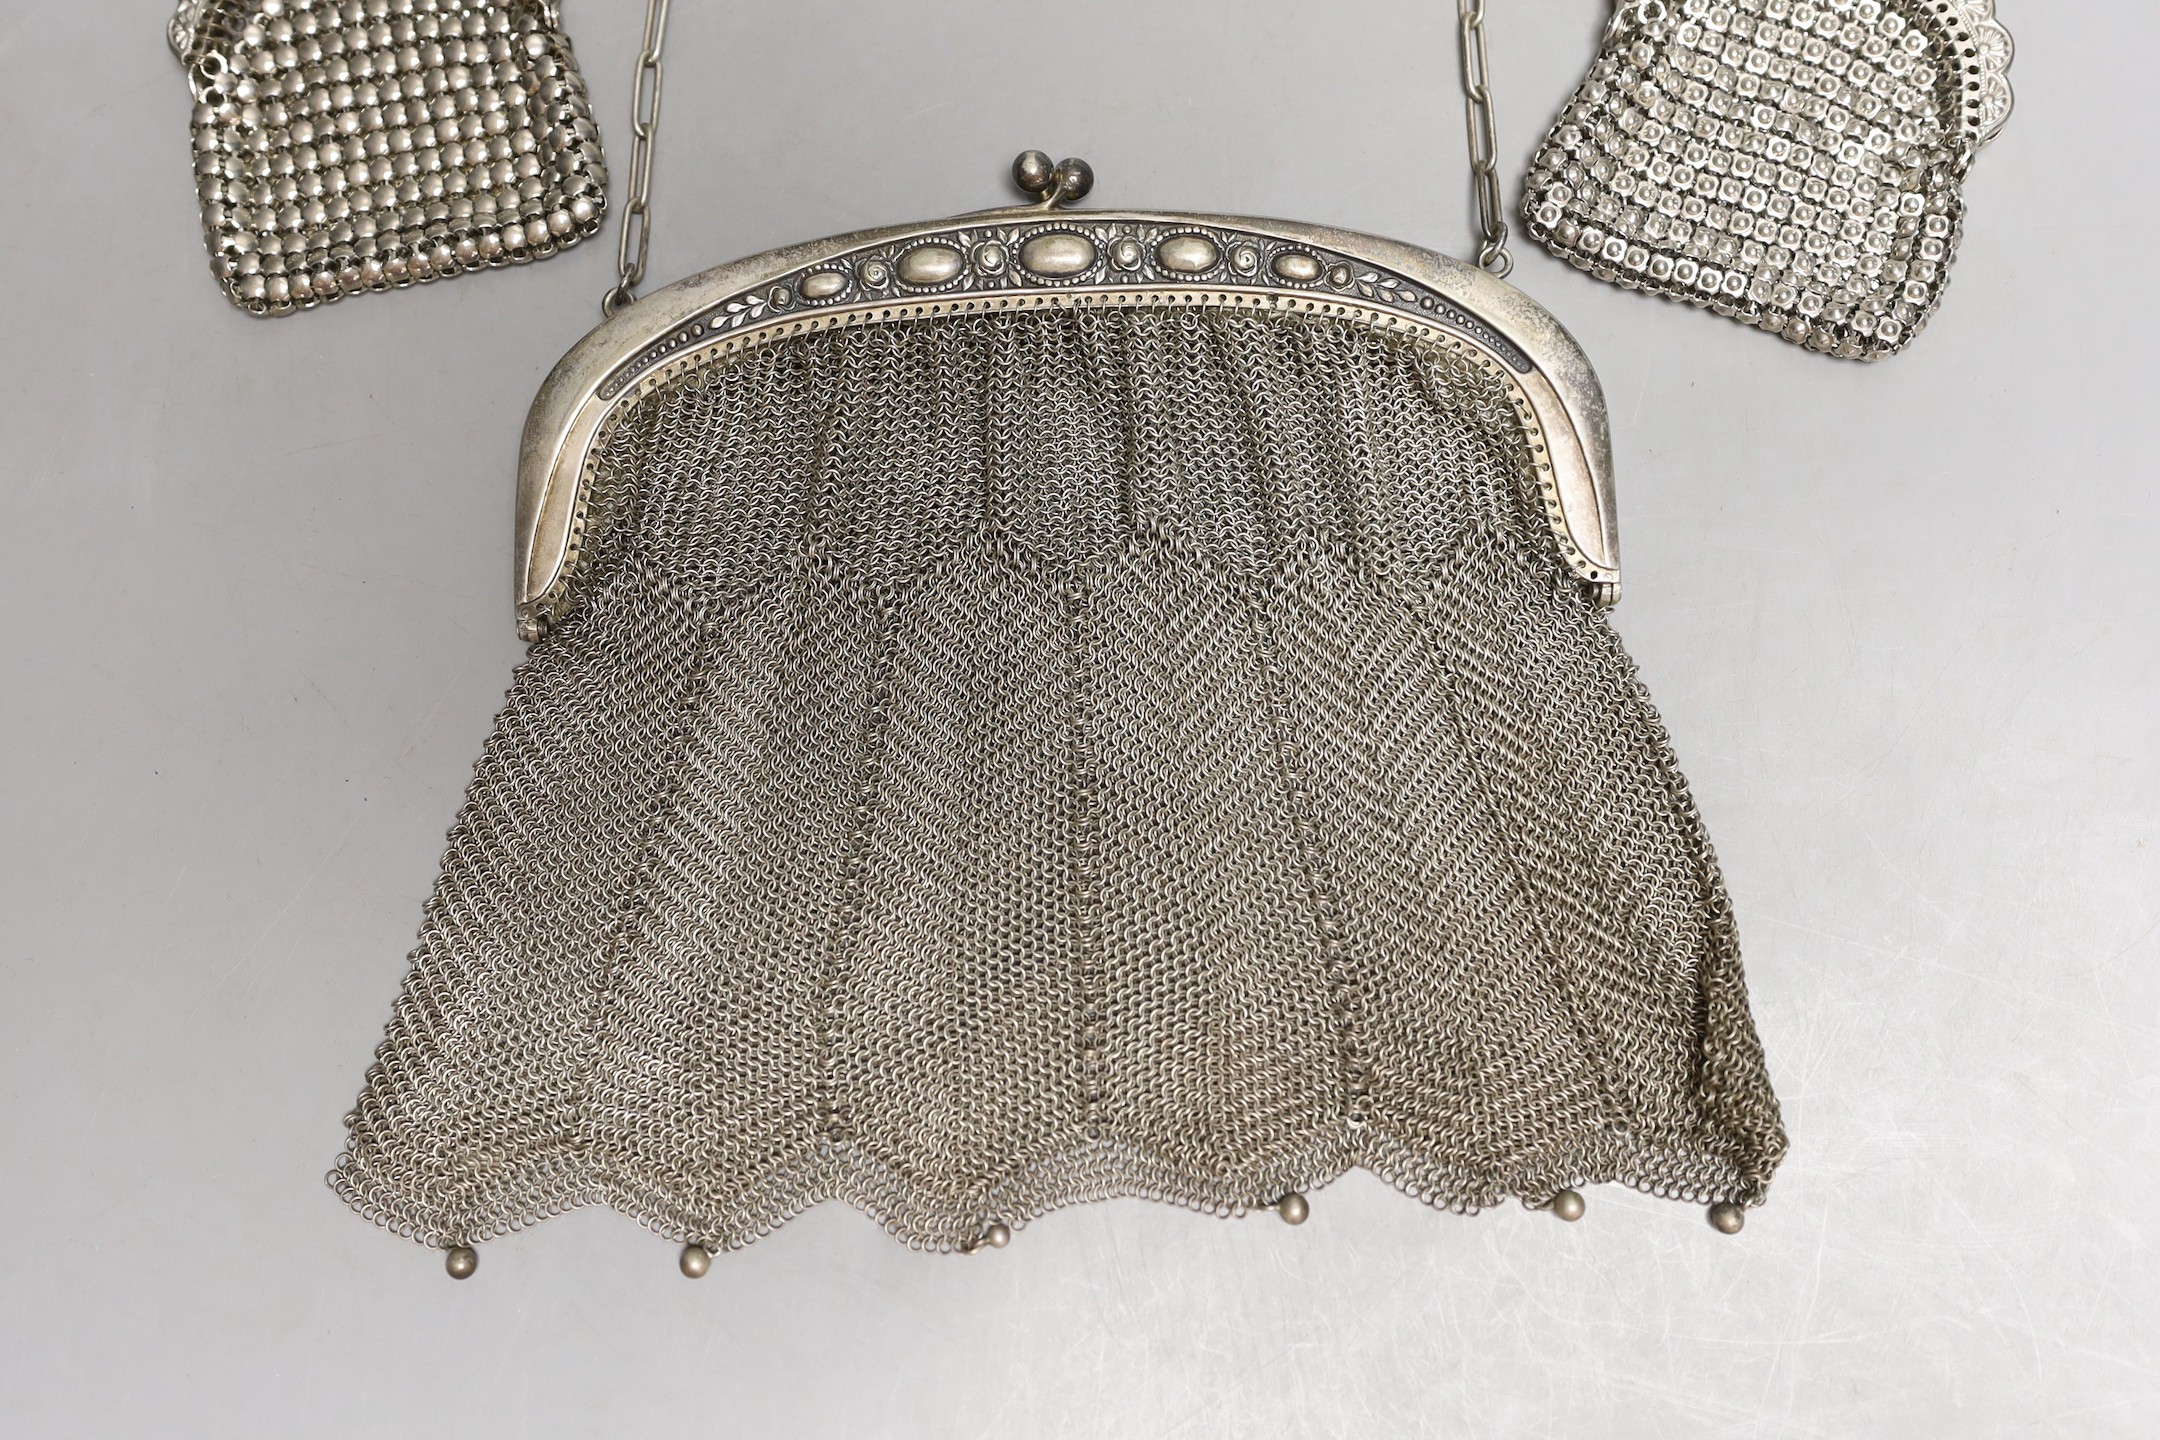 A chain mail metal evening bag and two similar purses.